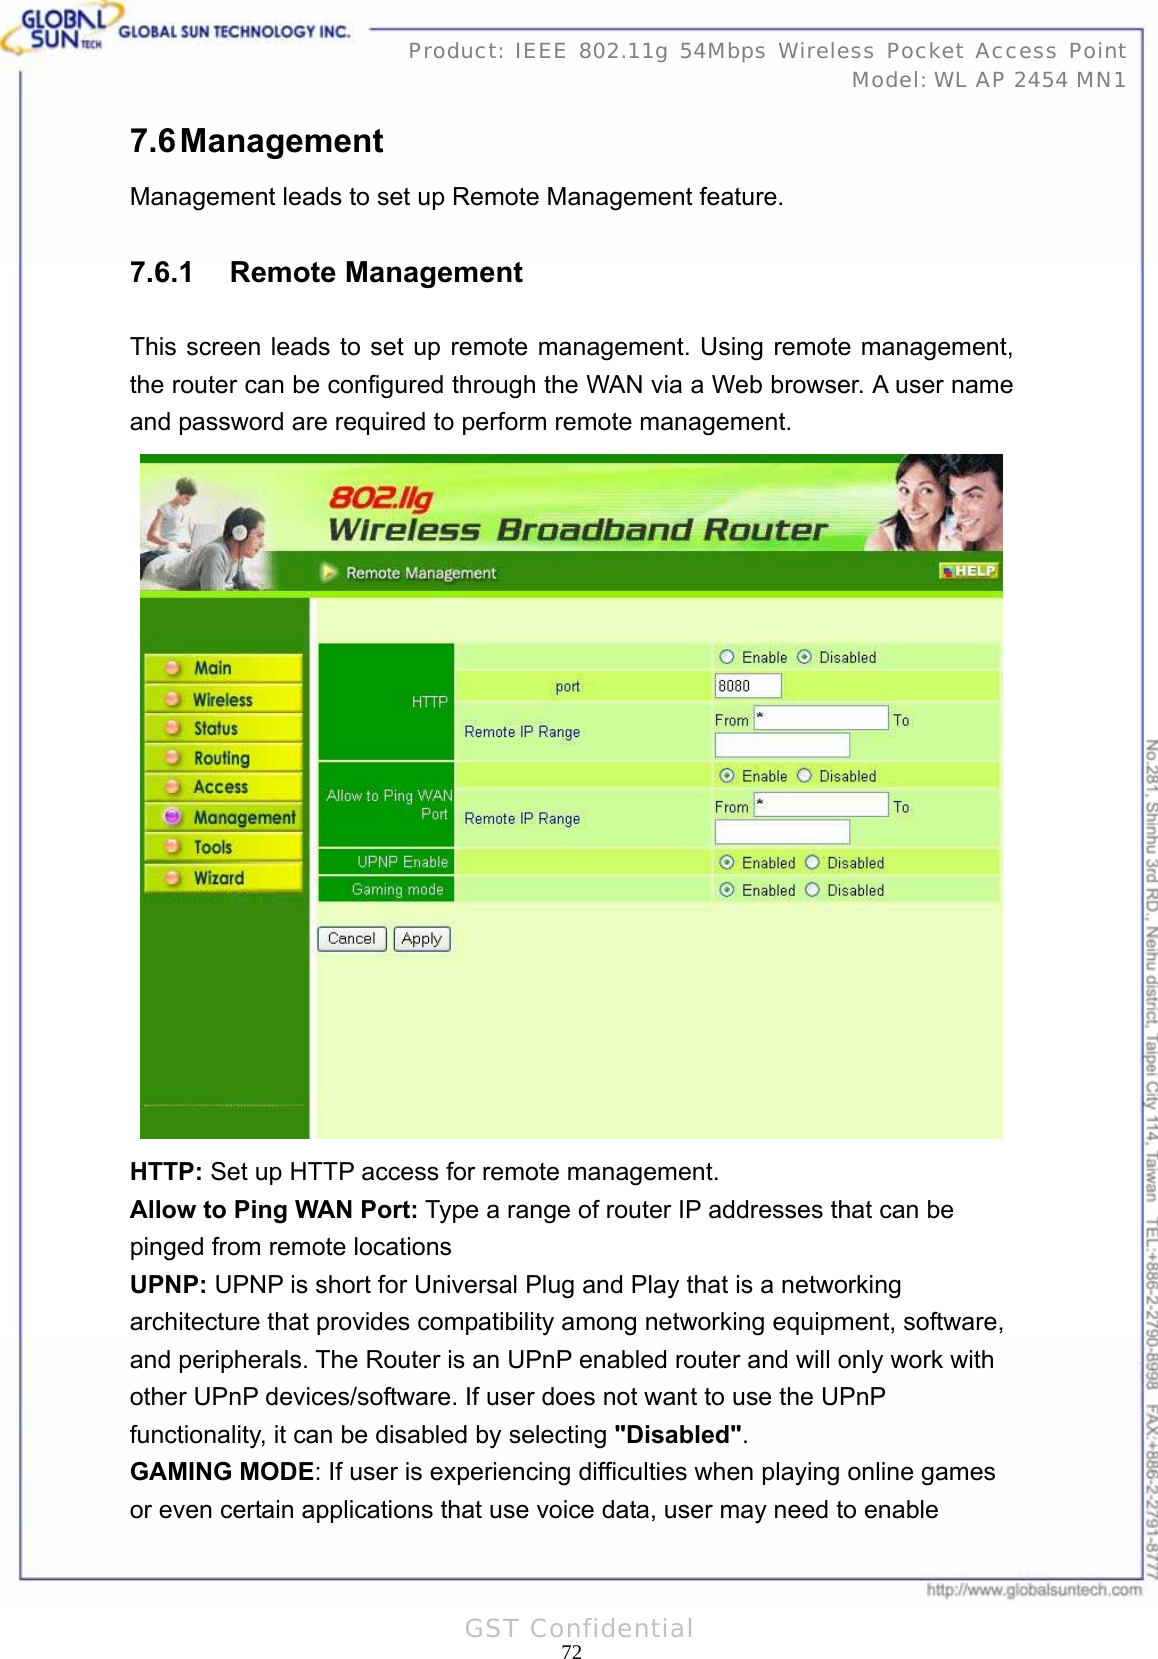   72Product: IEEE 802.11g 54Mbps Wireless Pocket Access Point Model: WL AP 2454 MN1GST Confidential 7.6 Management Management leads to set up Remote Management feature. 7.6.1 Remote Management This screen leads to set up remote management. Using remote management, the router can be configured through the WAN via a Web browser. A user name and password are required to perform remote management.  HTTP: Set up HTTP access for remote management. Allow to Ping WAN Port: Type a range of router IP addresses that can be pinged from remote locations UPNP: UPNP is short for Universal Plug and Play that is a networking architecture that provides compatibility among networking equipment, software, and peripherals. The Router is an UPnP enabled router and will only work with other UPnP devices/software. If user does not want to use the UPnP functionality, it can be disabled by selecting &quot;Disabled&quot;. GAMING MODE: If user is experiencing difficulties when playing online games or even certain applications that use voice data, user may need to enable 